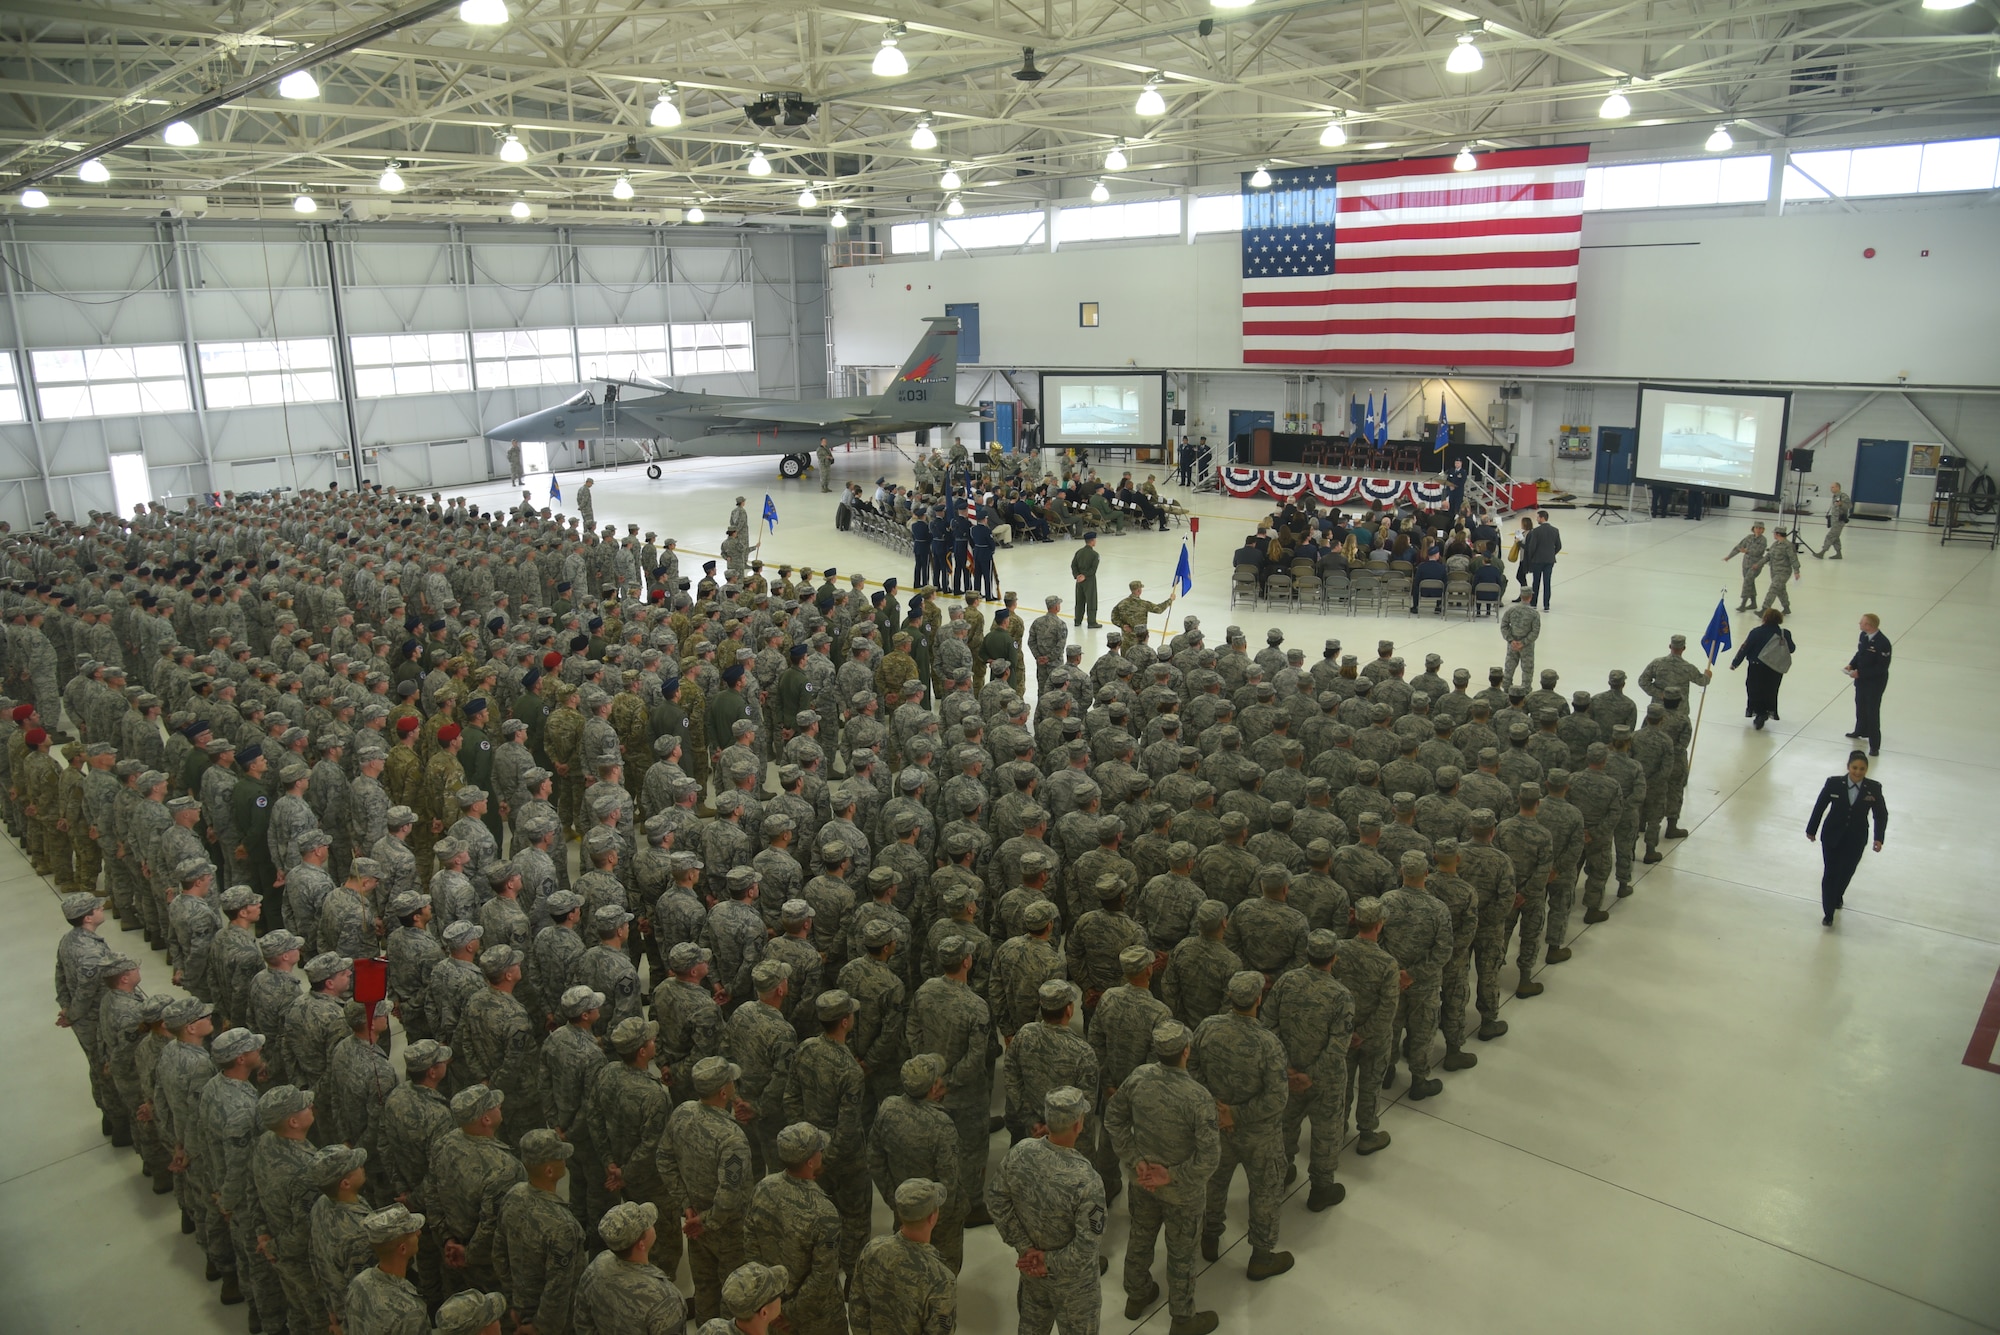 Oregon Air National Guard members of the 142nd Fighter Wing are assembled prior to the start of the unit's Change of Command ceremony held Nov. 6, 2016, Portland Air National Guard Base, Ore. (U.S. Air National Guard photograph by Senior Master Sgt. Shelly Davison, 142nd Fighter Wing Public Affairs)